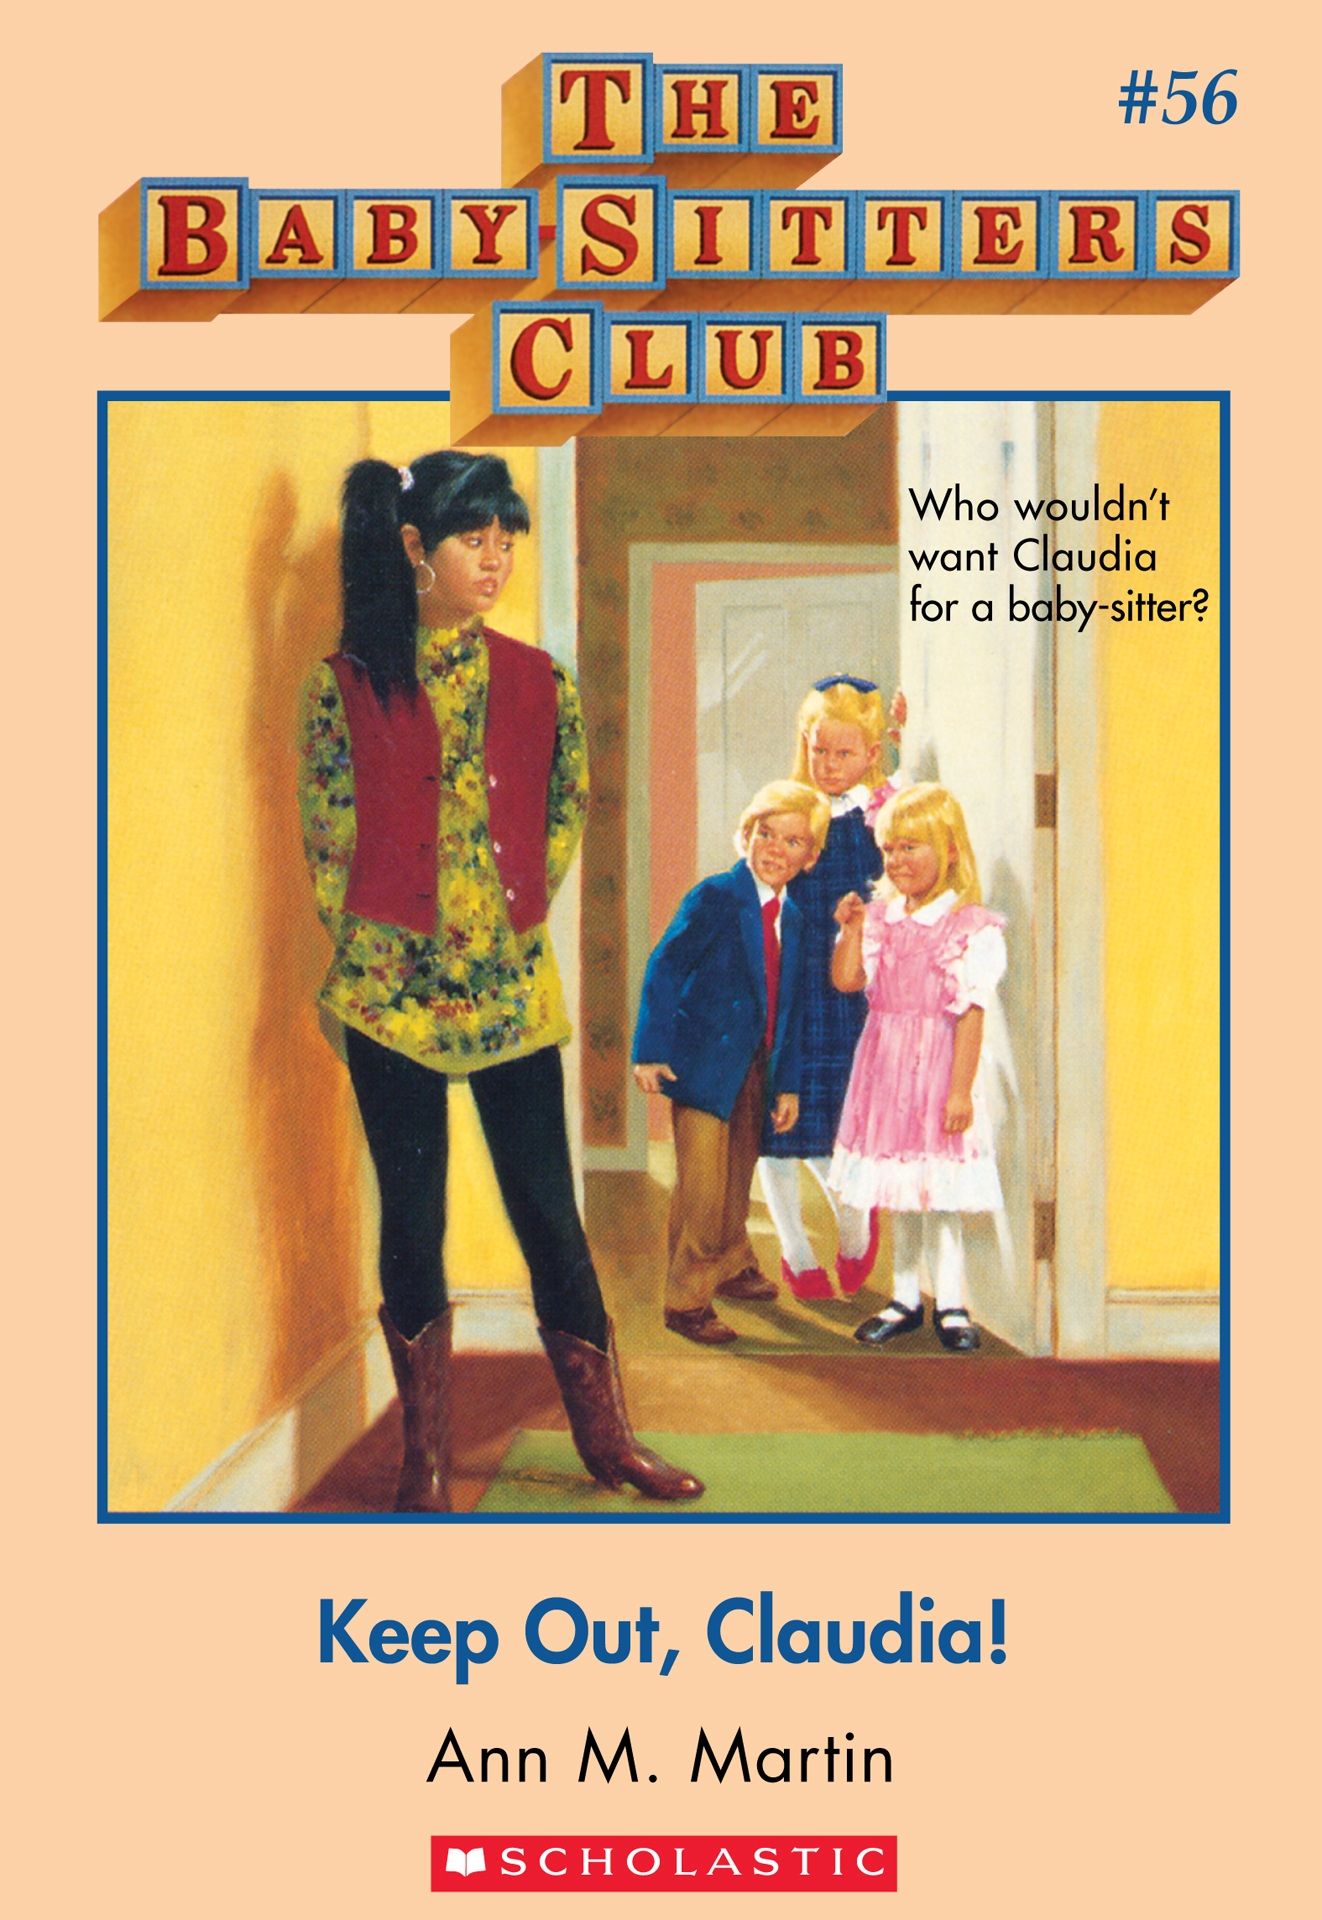 Keep Out, Claudia!. The Baby Sitters Club